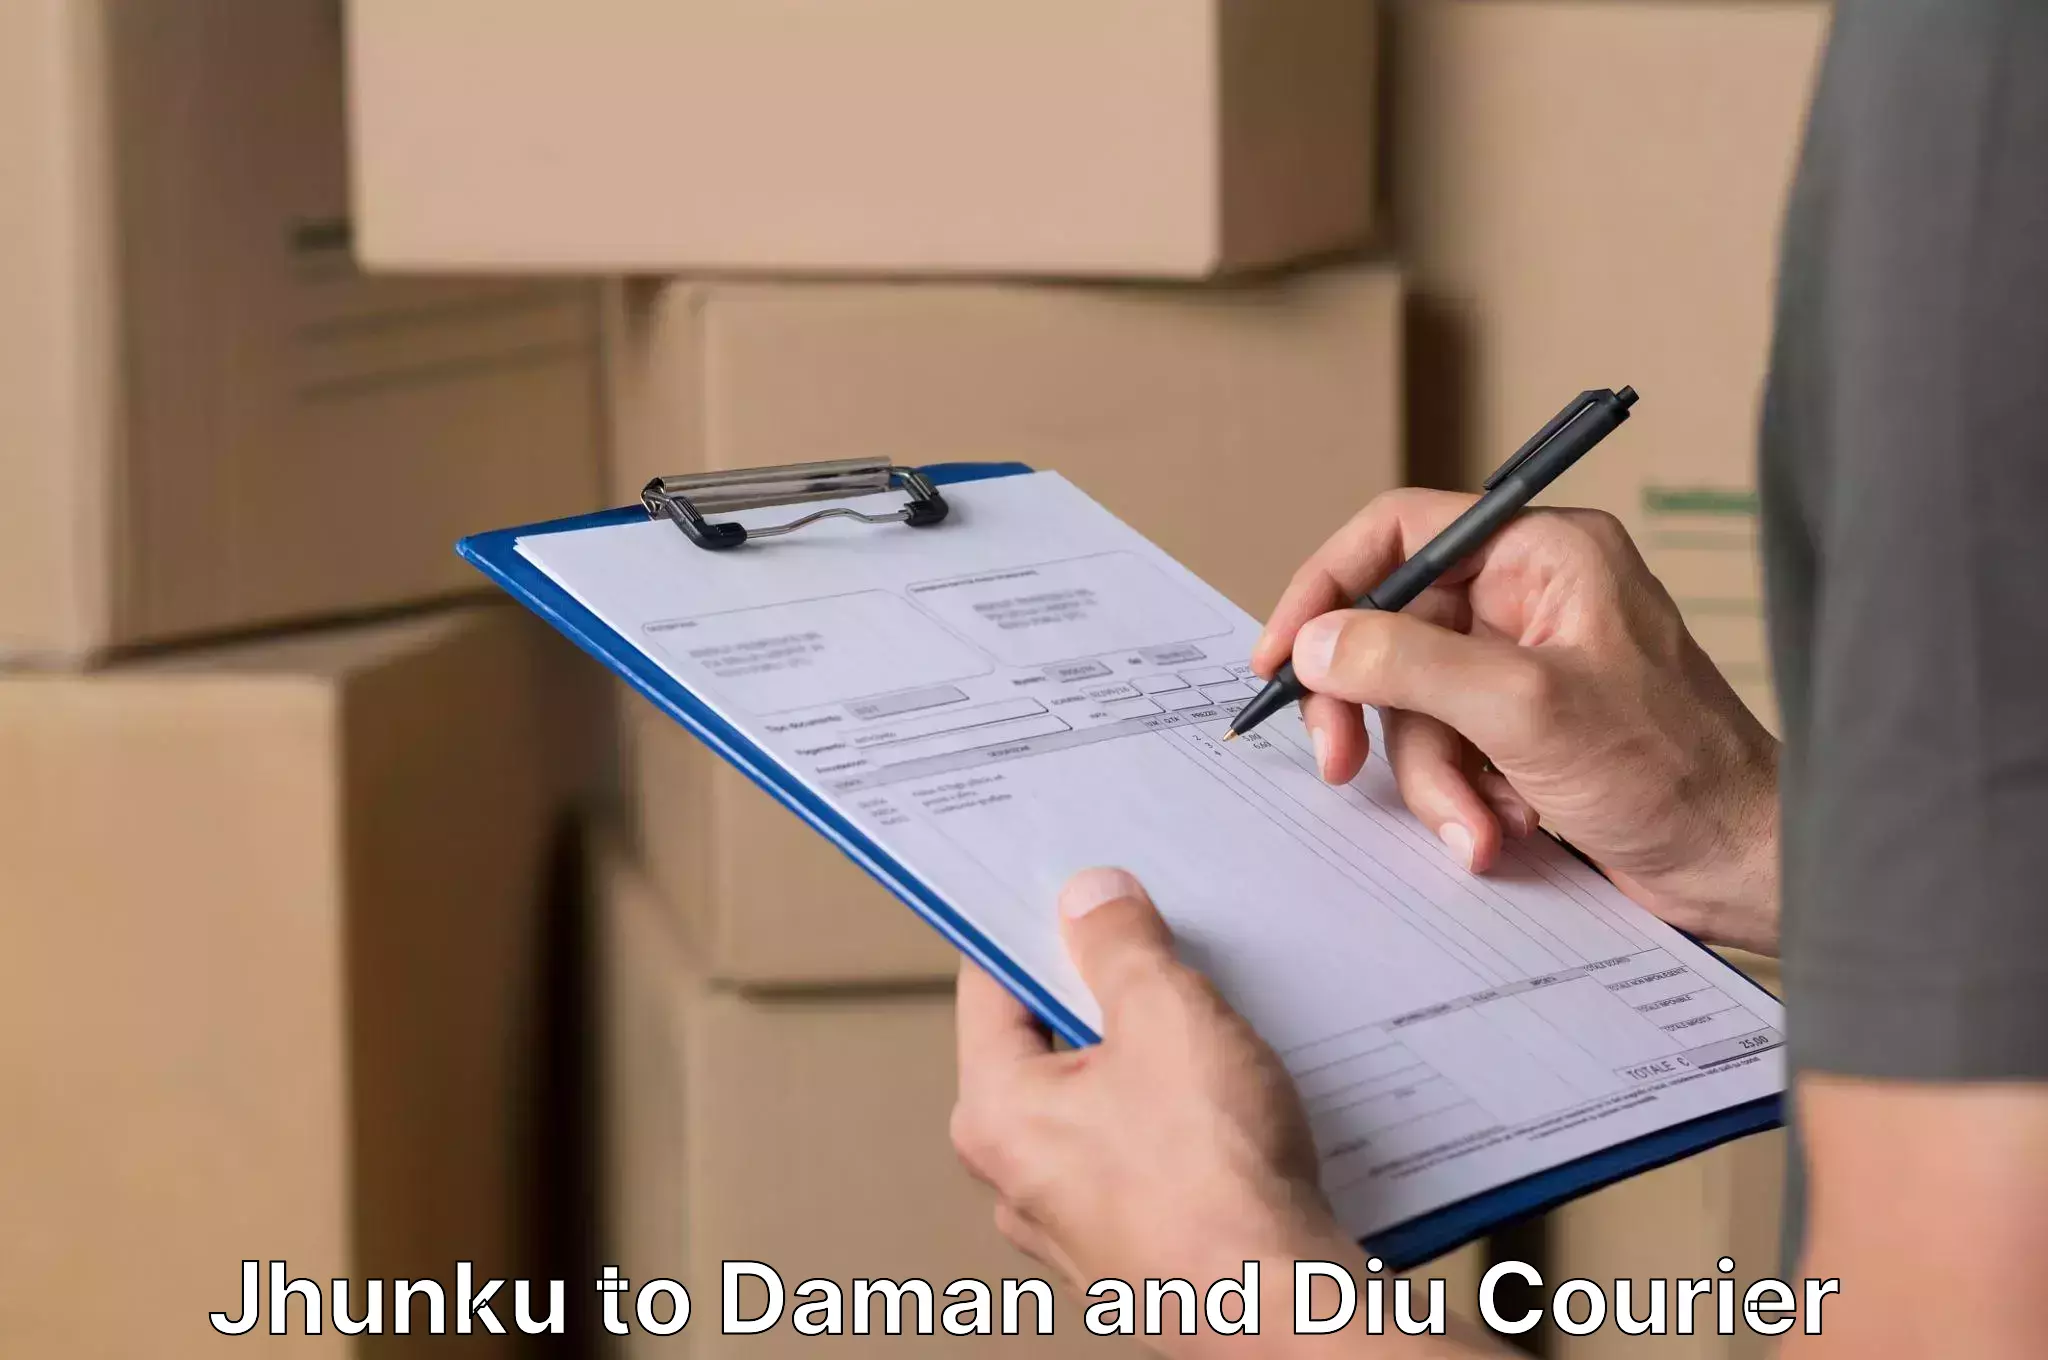 Quality relocation assistance in Jhunku to Daman and Diu